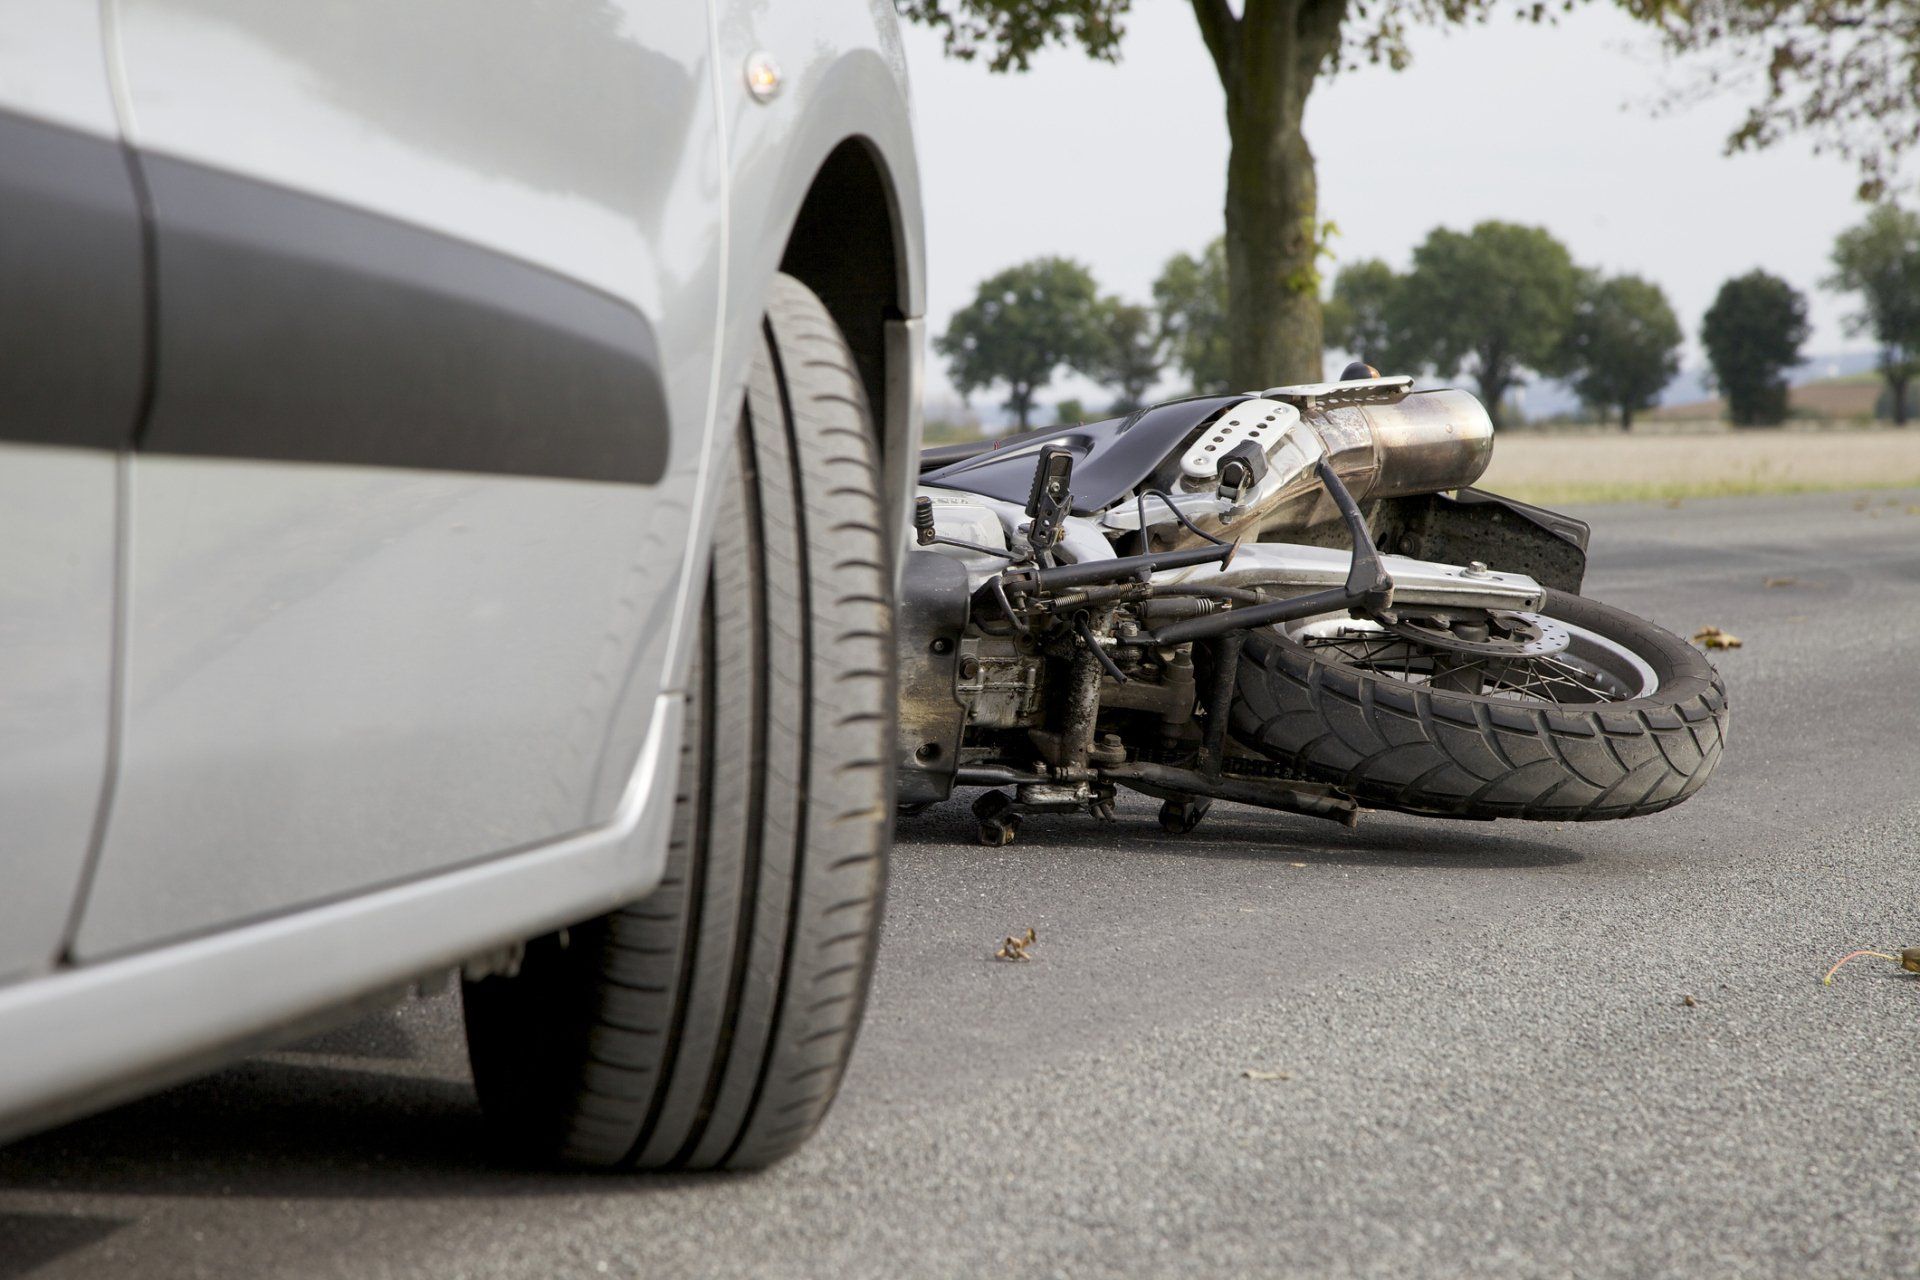 An accident that needs the support of a motorcycle accidents personal injury attorney near El Dorado Hills, CA